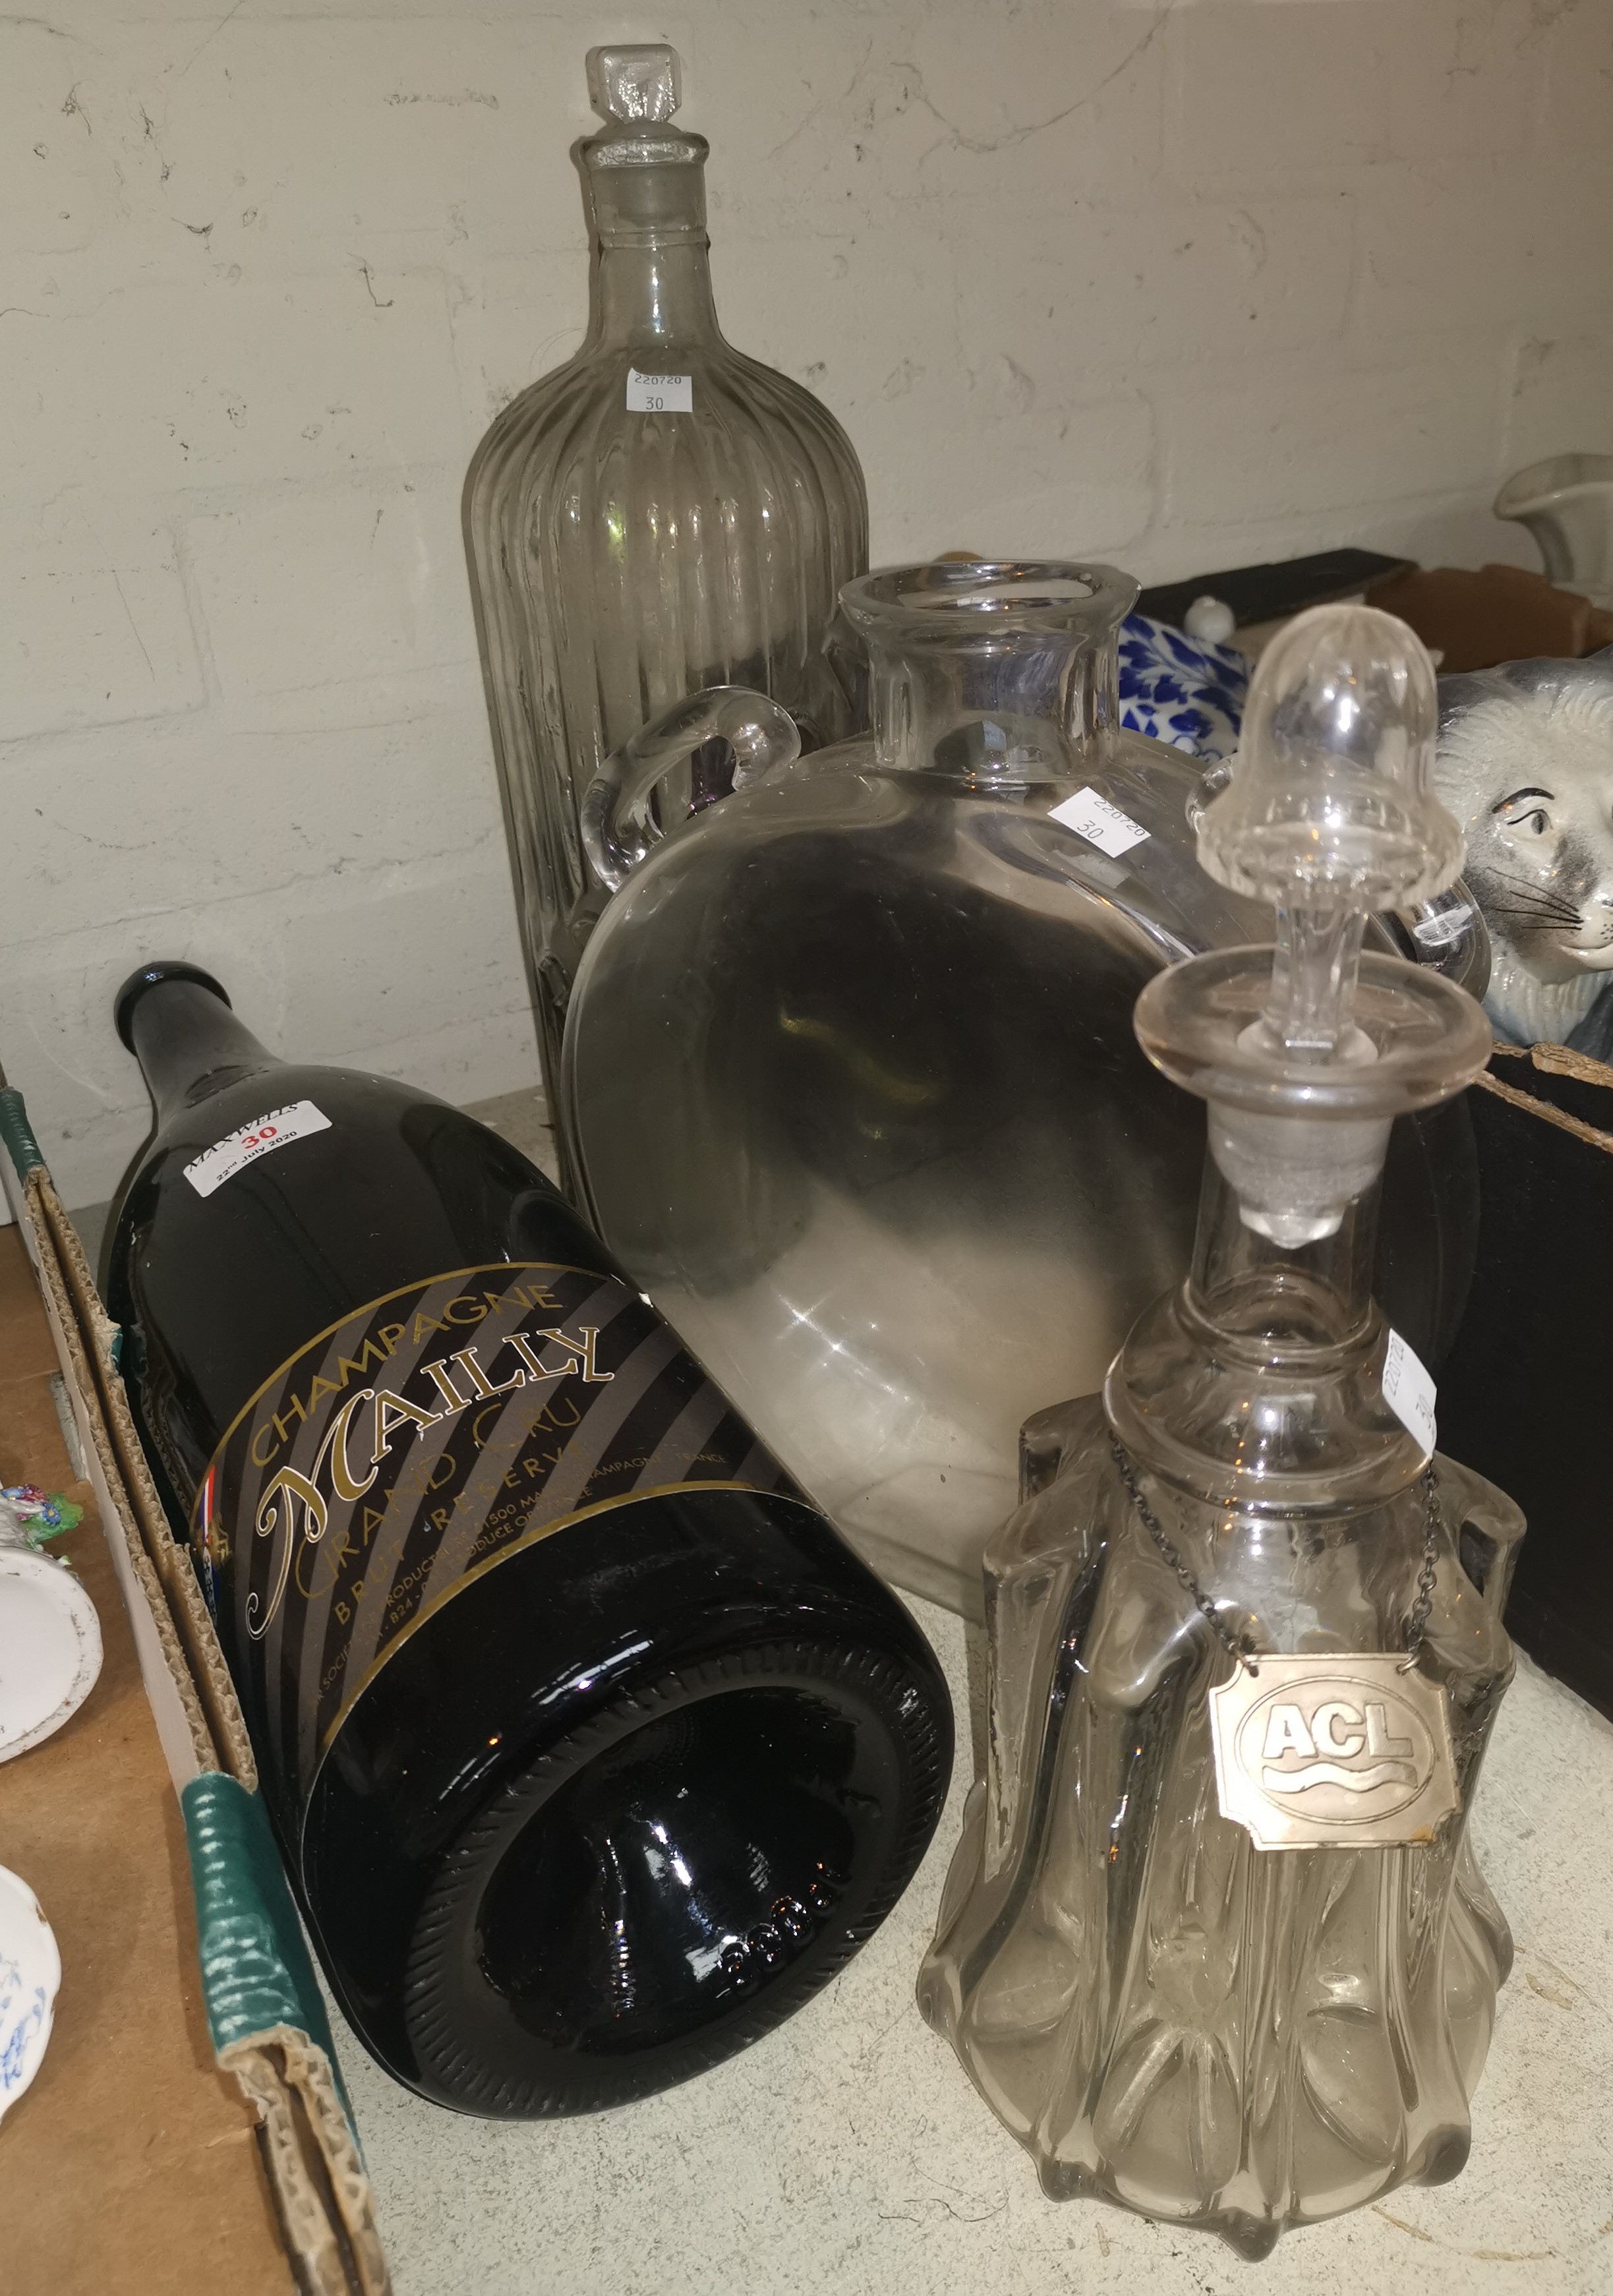 A large champagne bottle, a large poison bottle and glassware